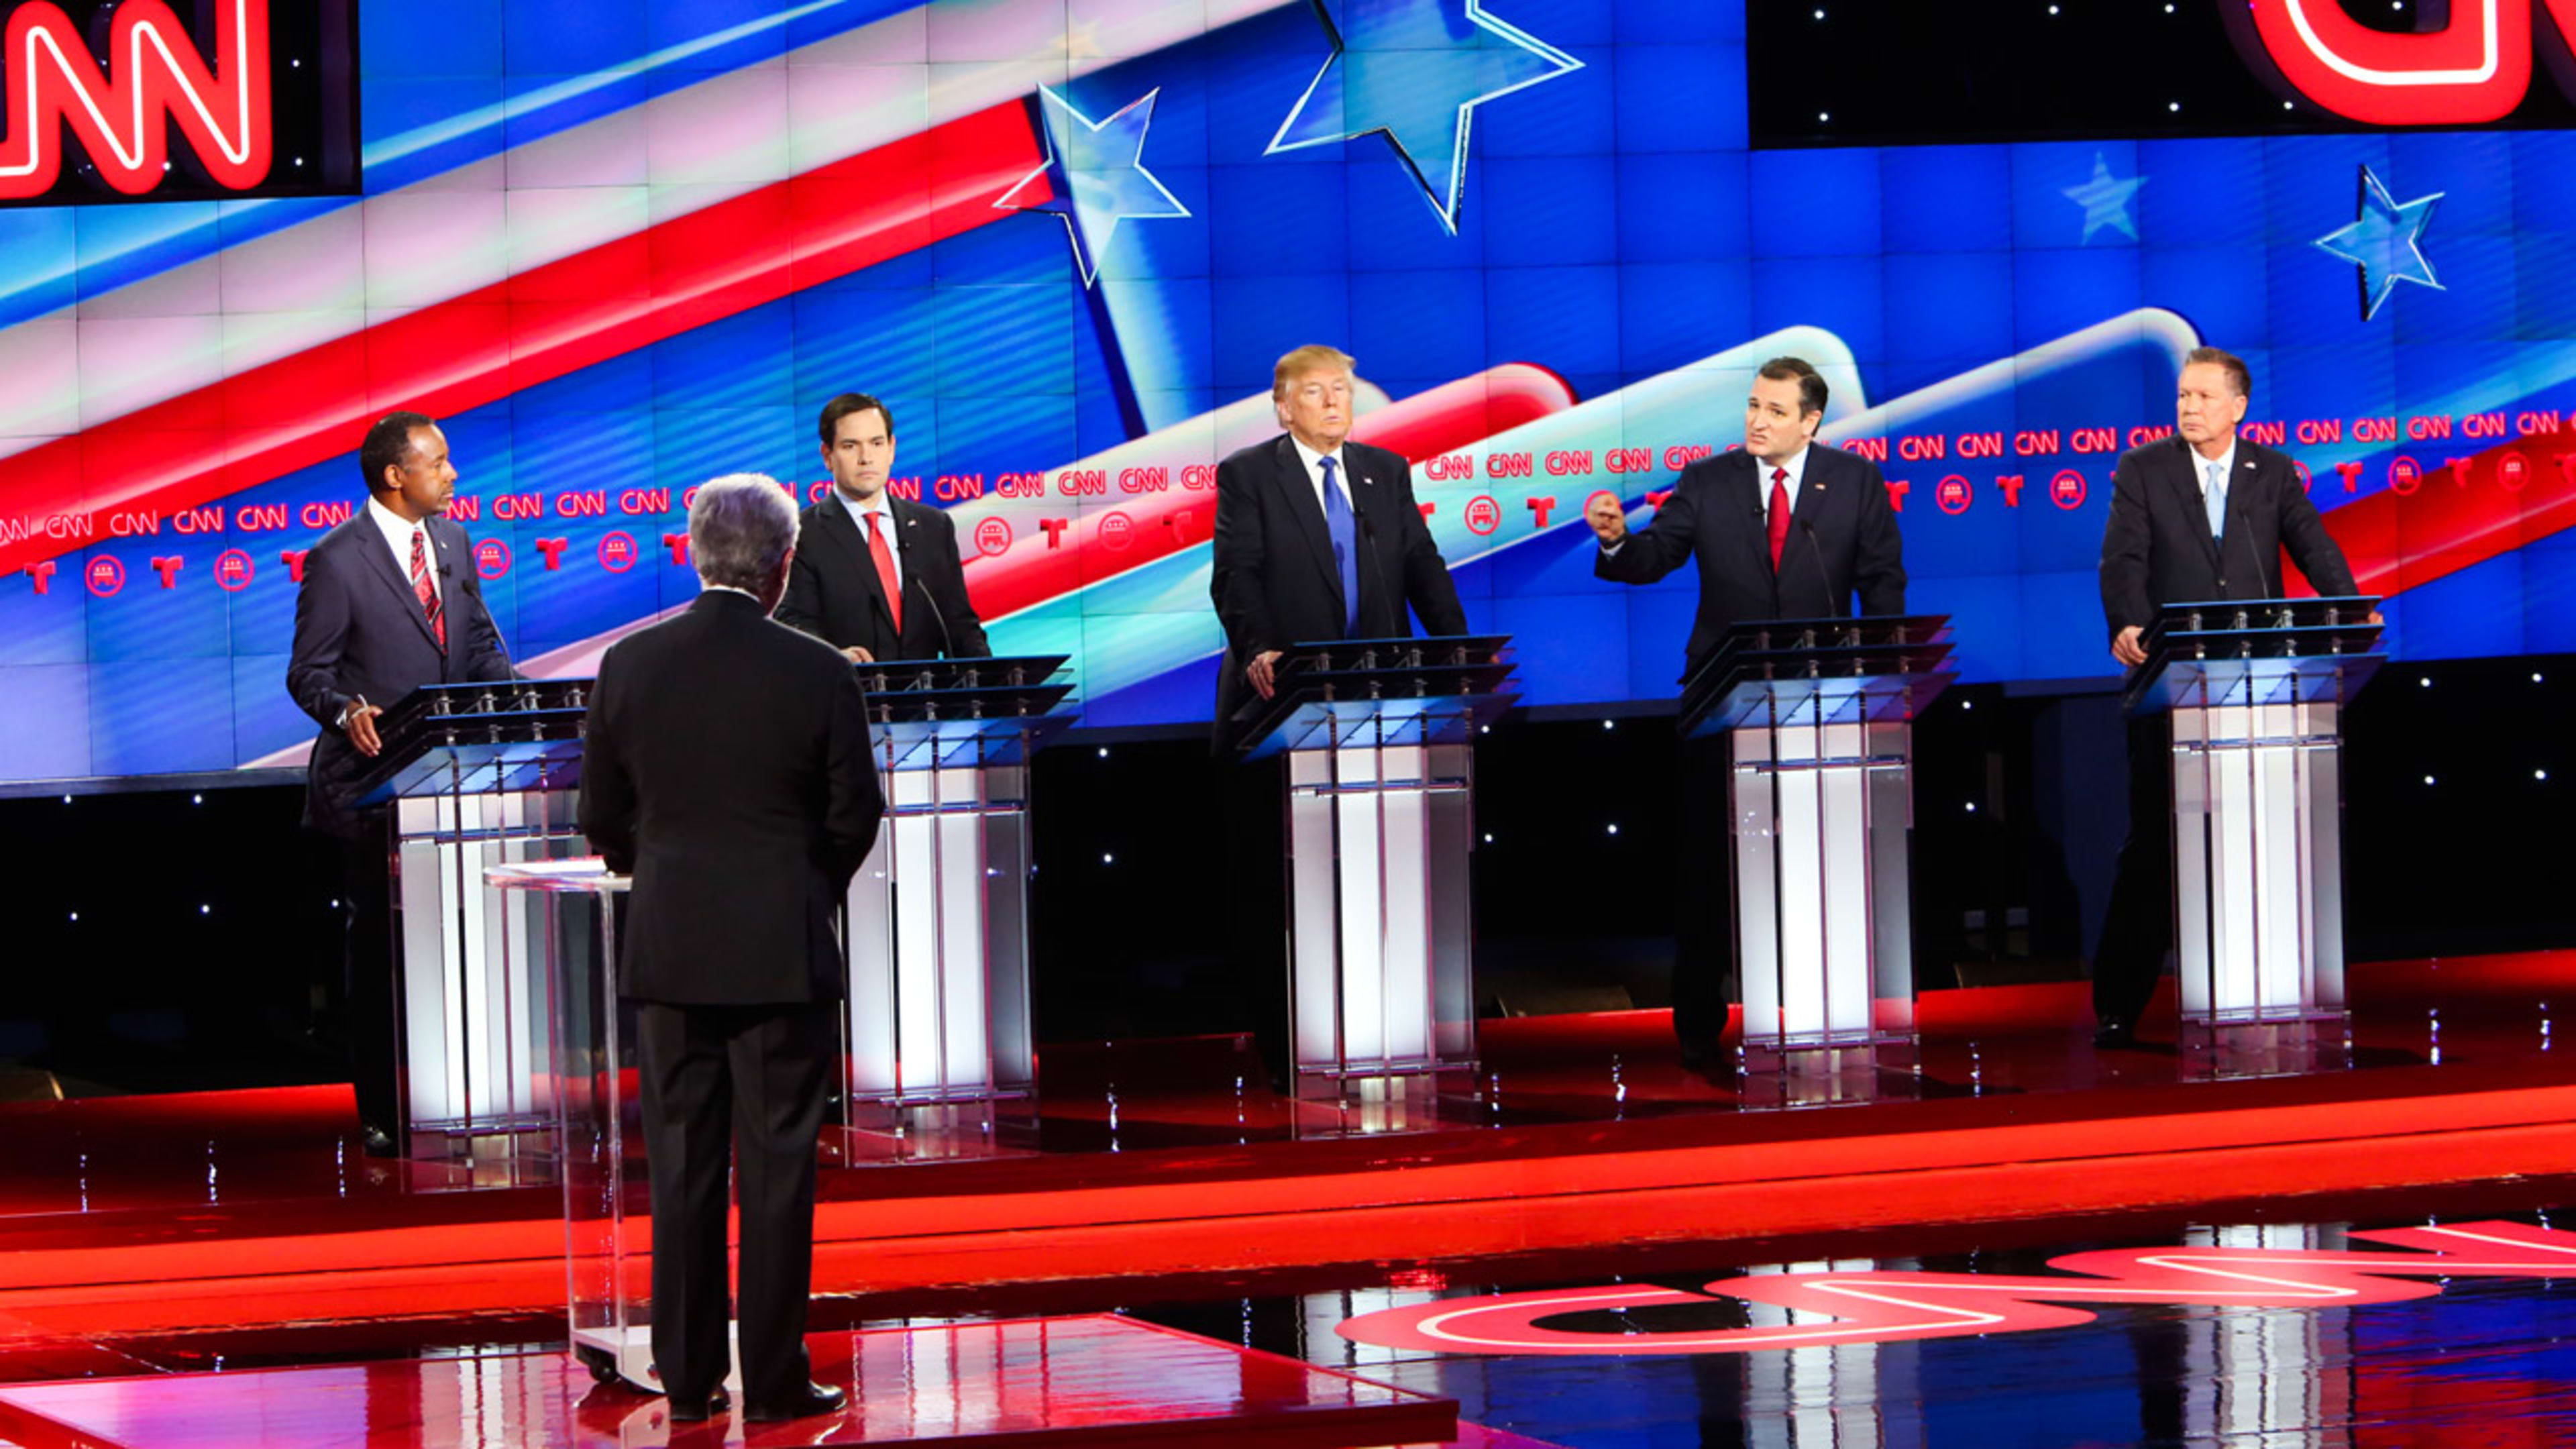 GOP Candidates Unanimous: Apple Must Comply With Court Order On Terrorist’s Phone